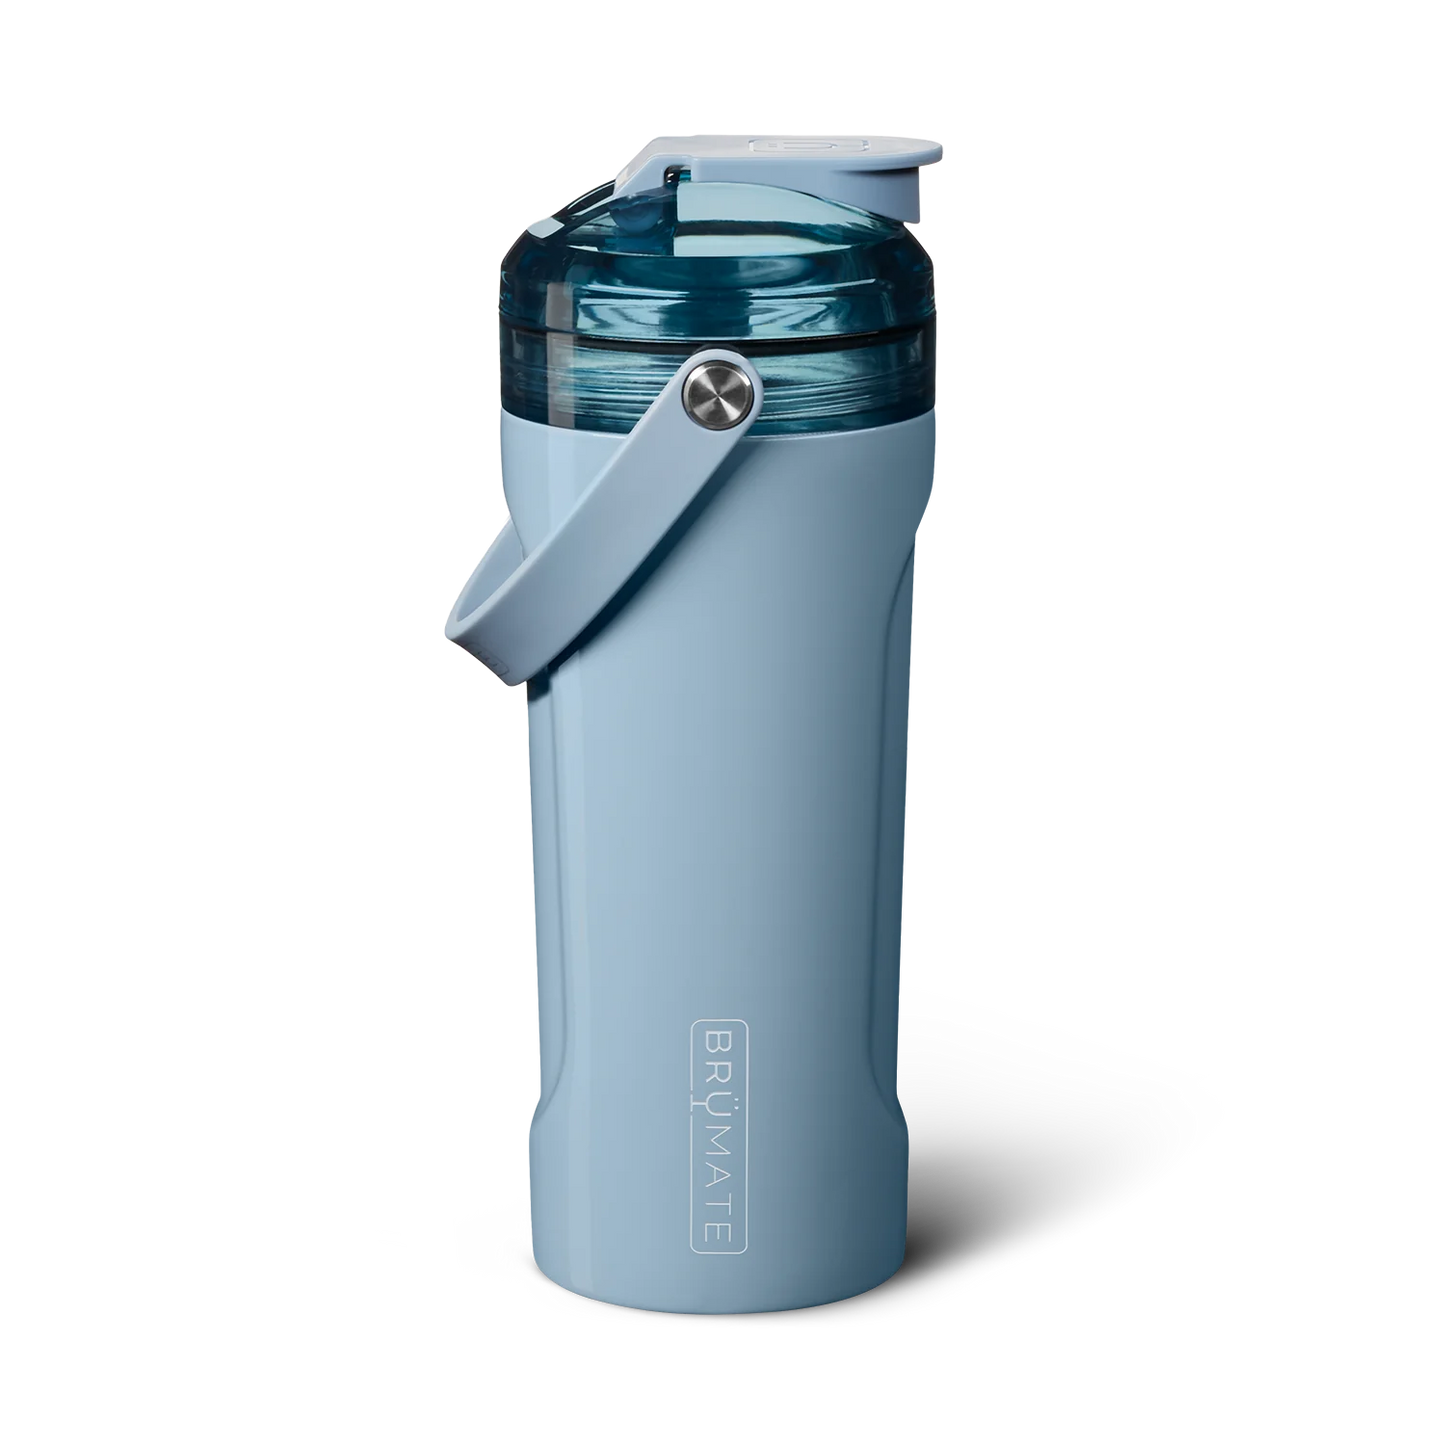 The MultiShaker is made for elevating your fitness journey. Our built-in patent-pending agitator blends your shakes, greens, and powders without any clumps, while also serving as a water infuser for herbs and fruits. It includes our BevGuard™ insulation to keep ice for 24+ hours, a spill-proof MagFlip™ lid, volume markings on the inside, a durable silicone handle, a non-slip base, and the ability to interchange tops with our MÜV or Straw Lids, making it perfect for any workout or adventure.(denim)